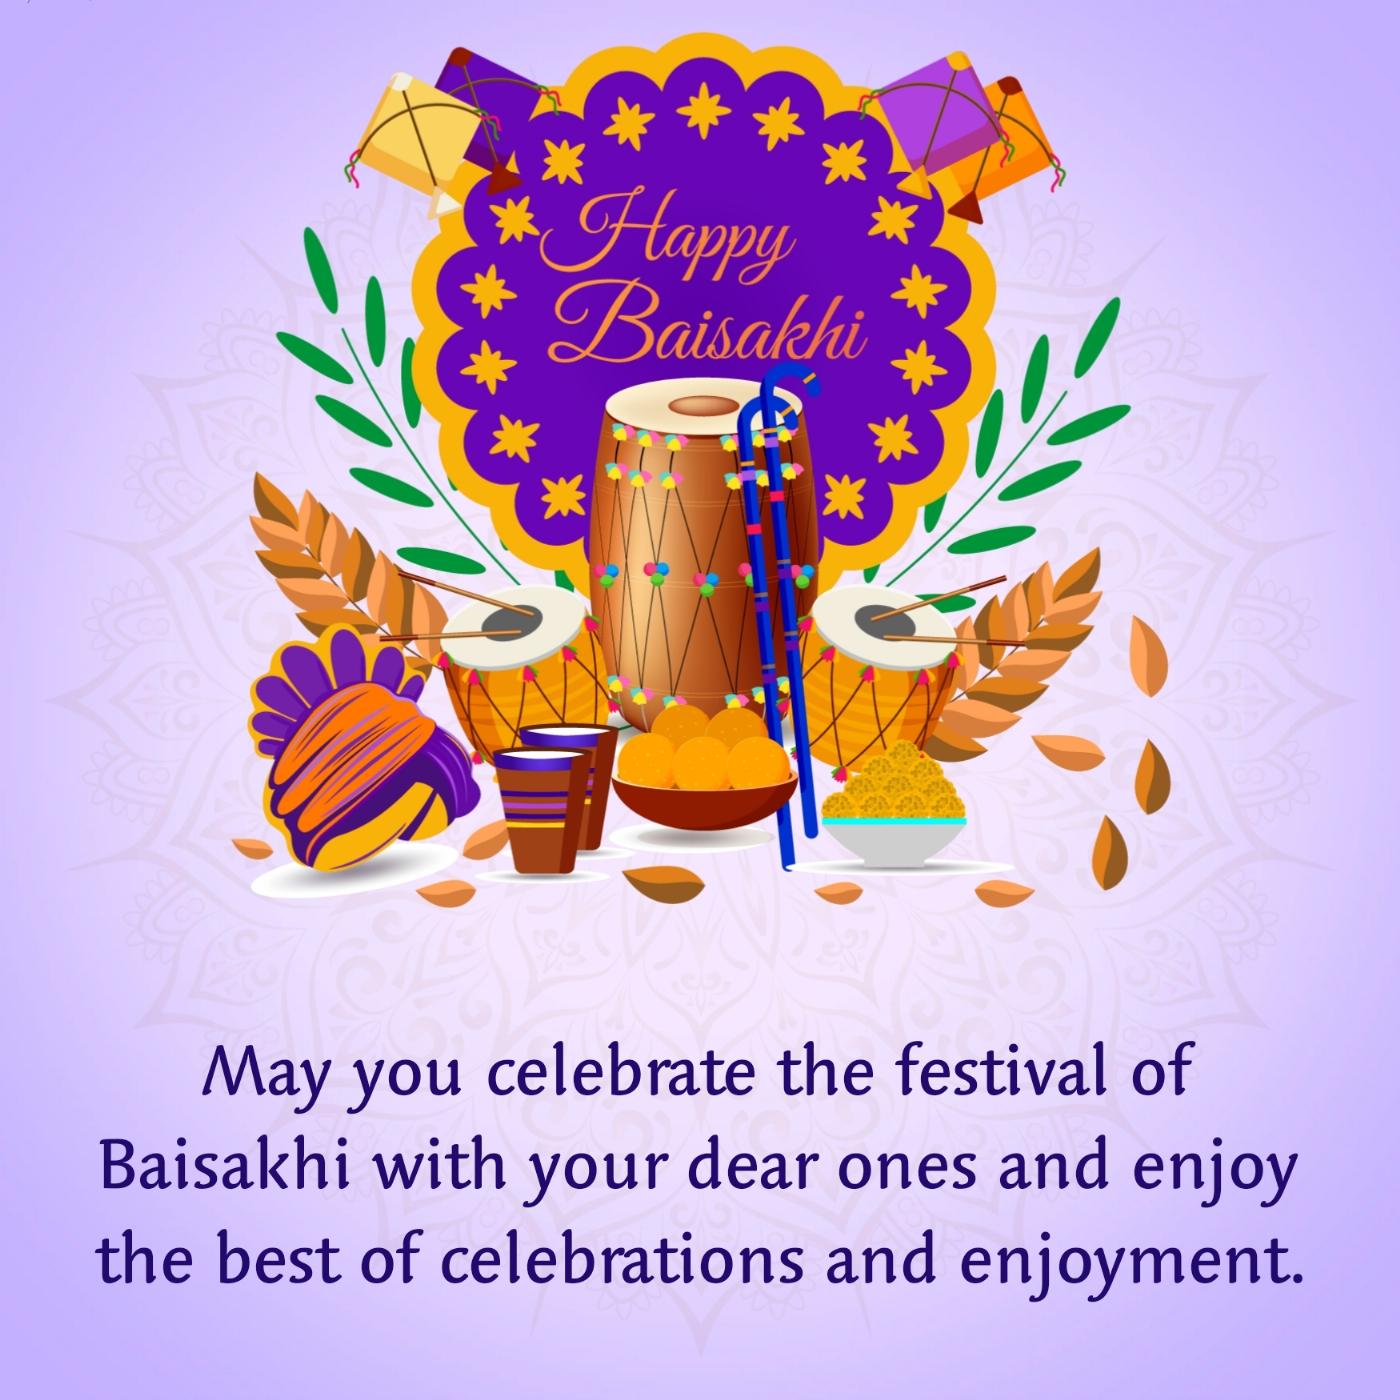 May you celebrate the festival of Baisakhi with your dear ones